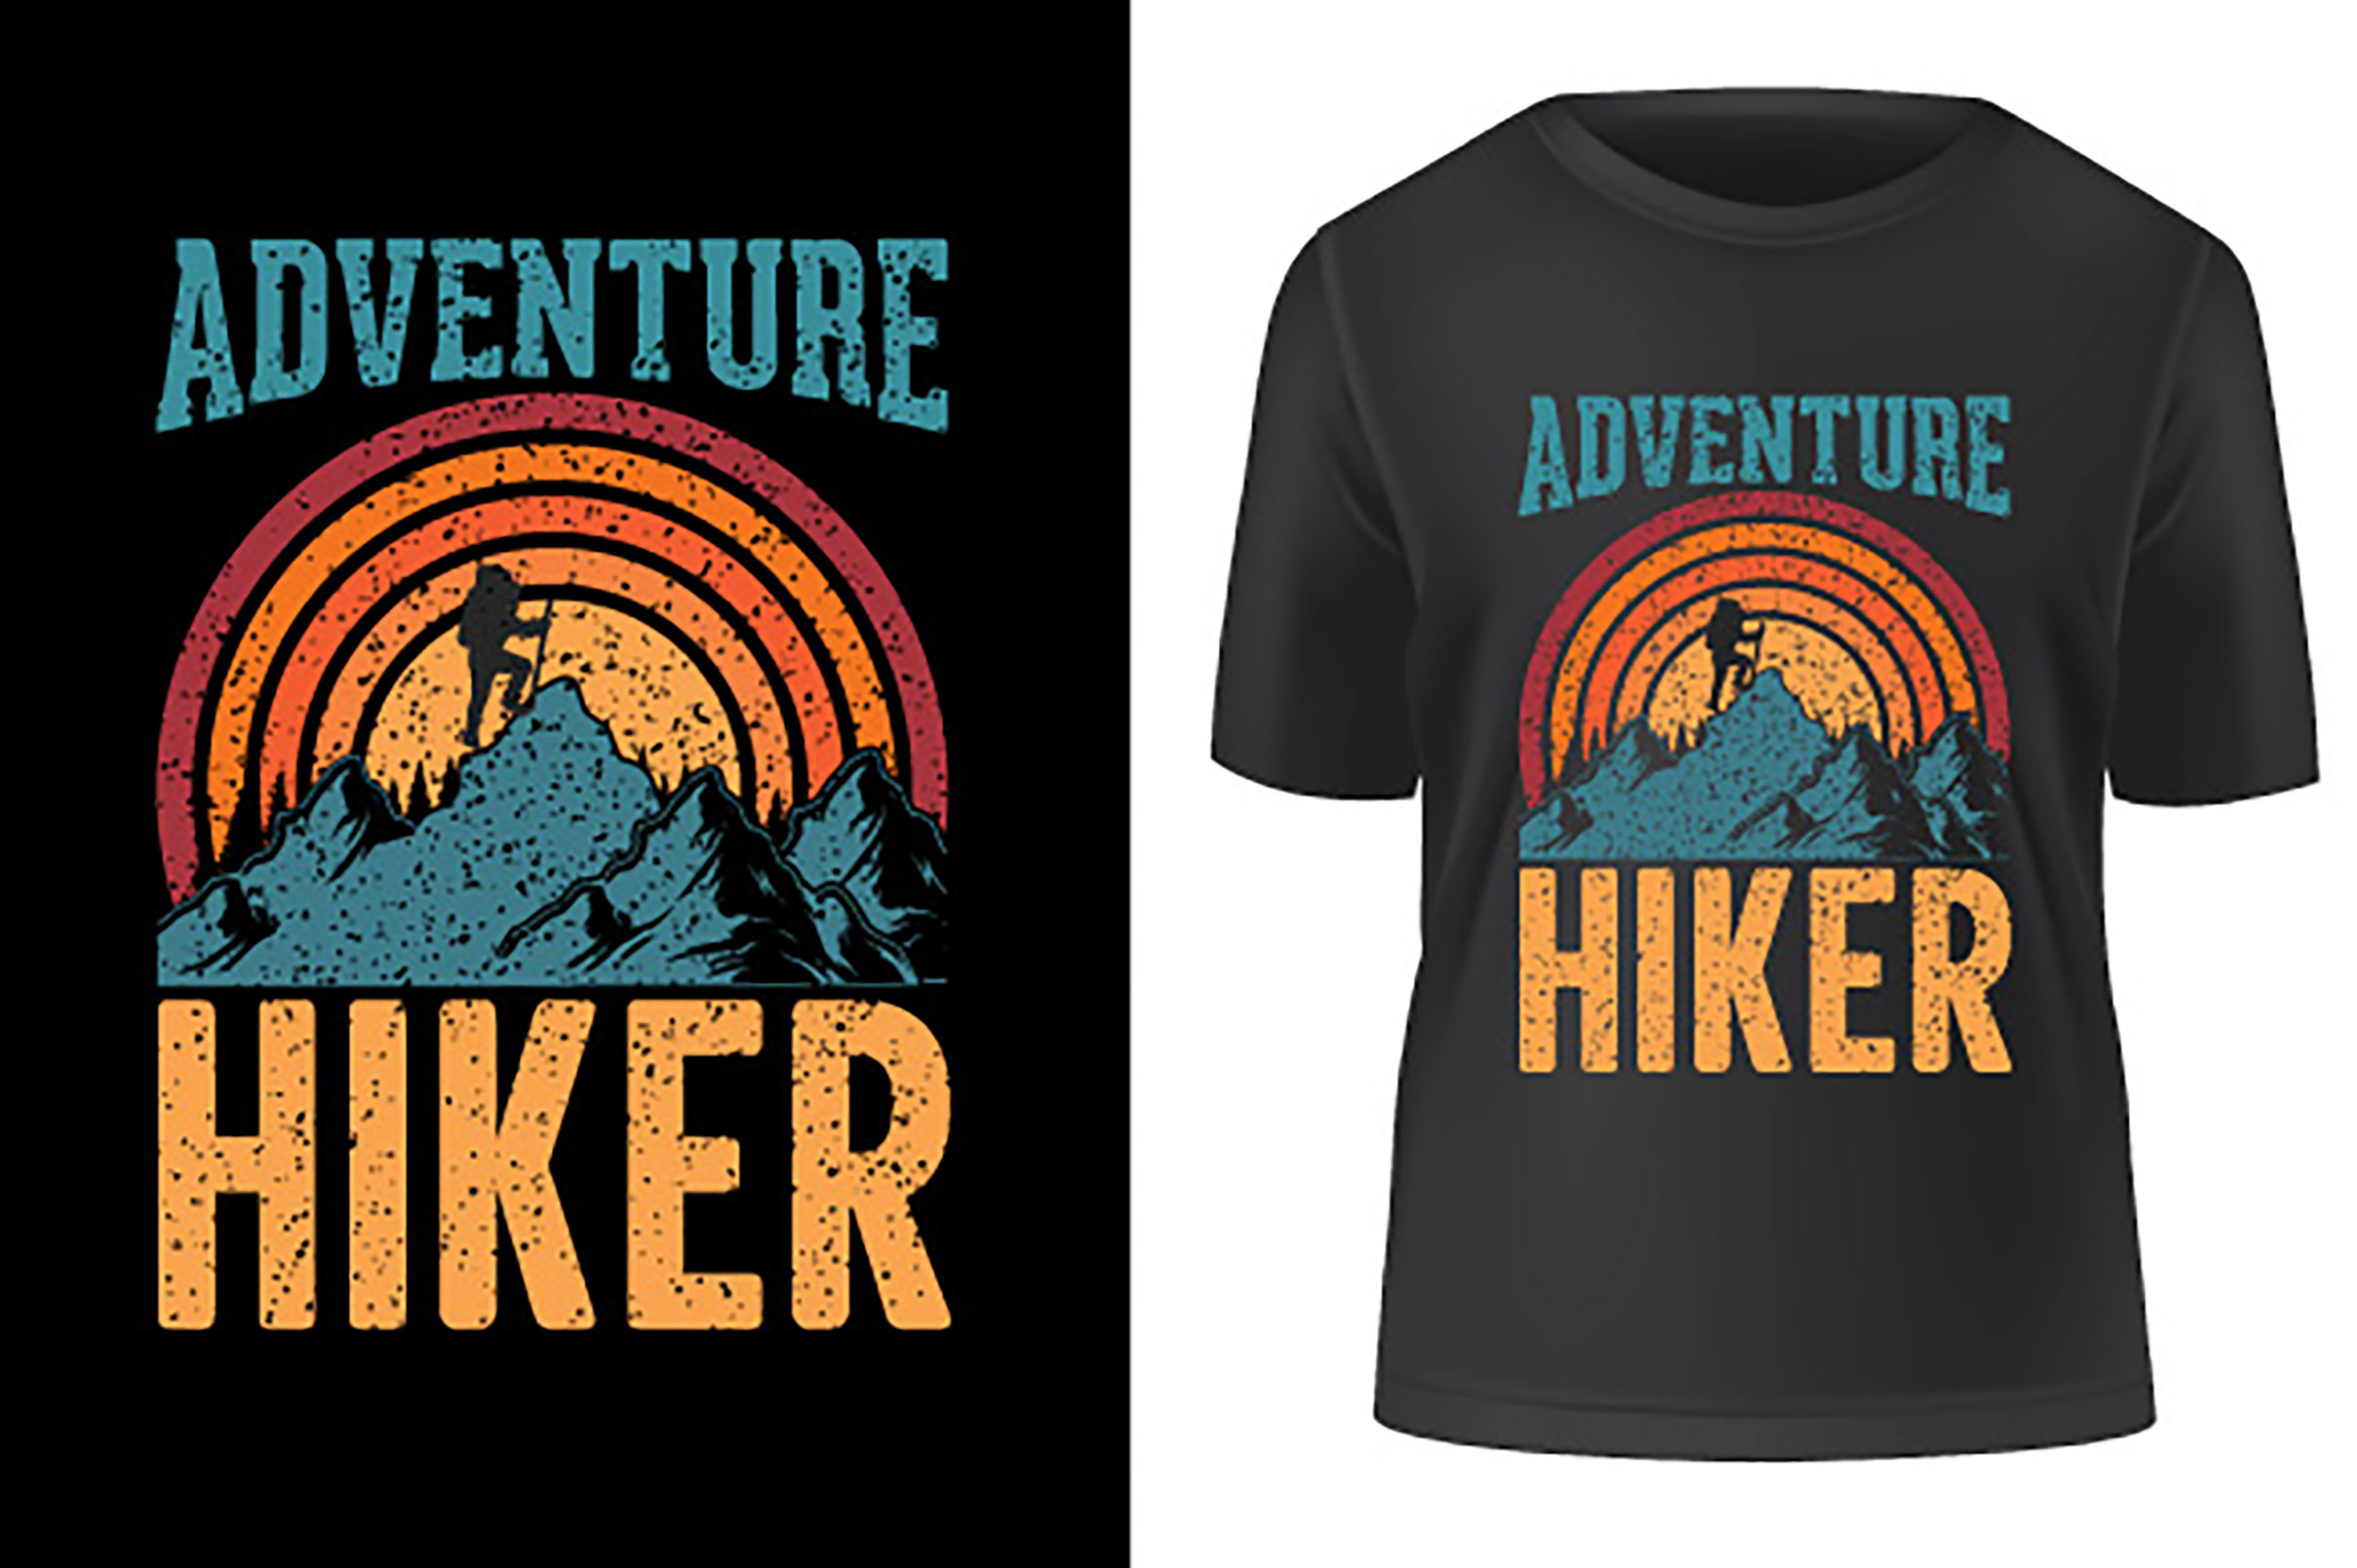 Adventure hiking design like t-shirt Lovers preview image.